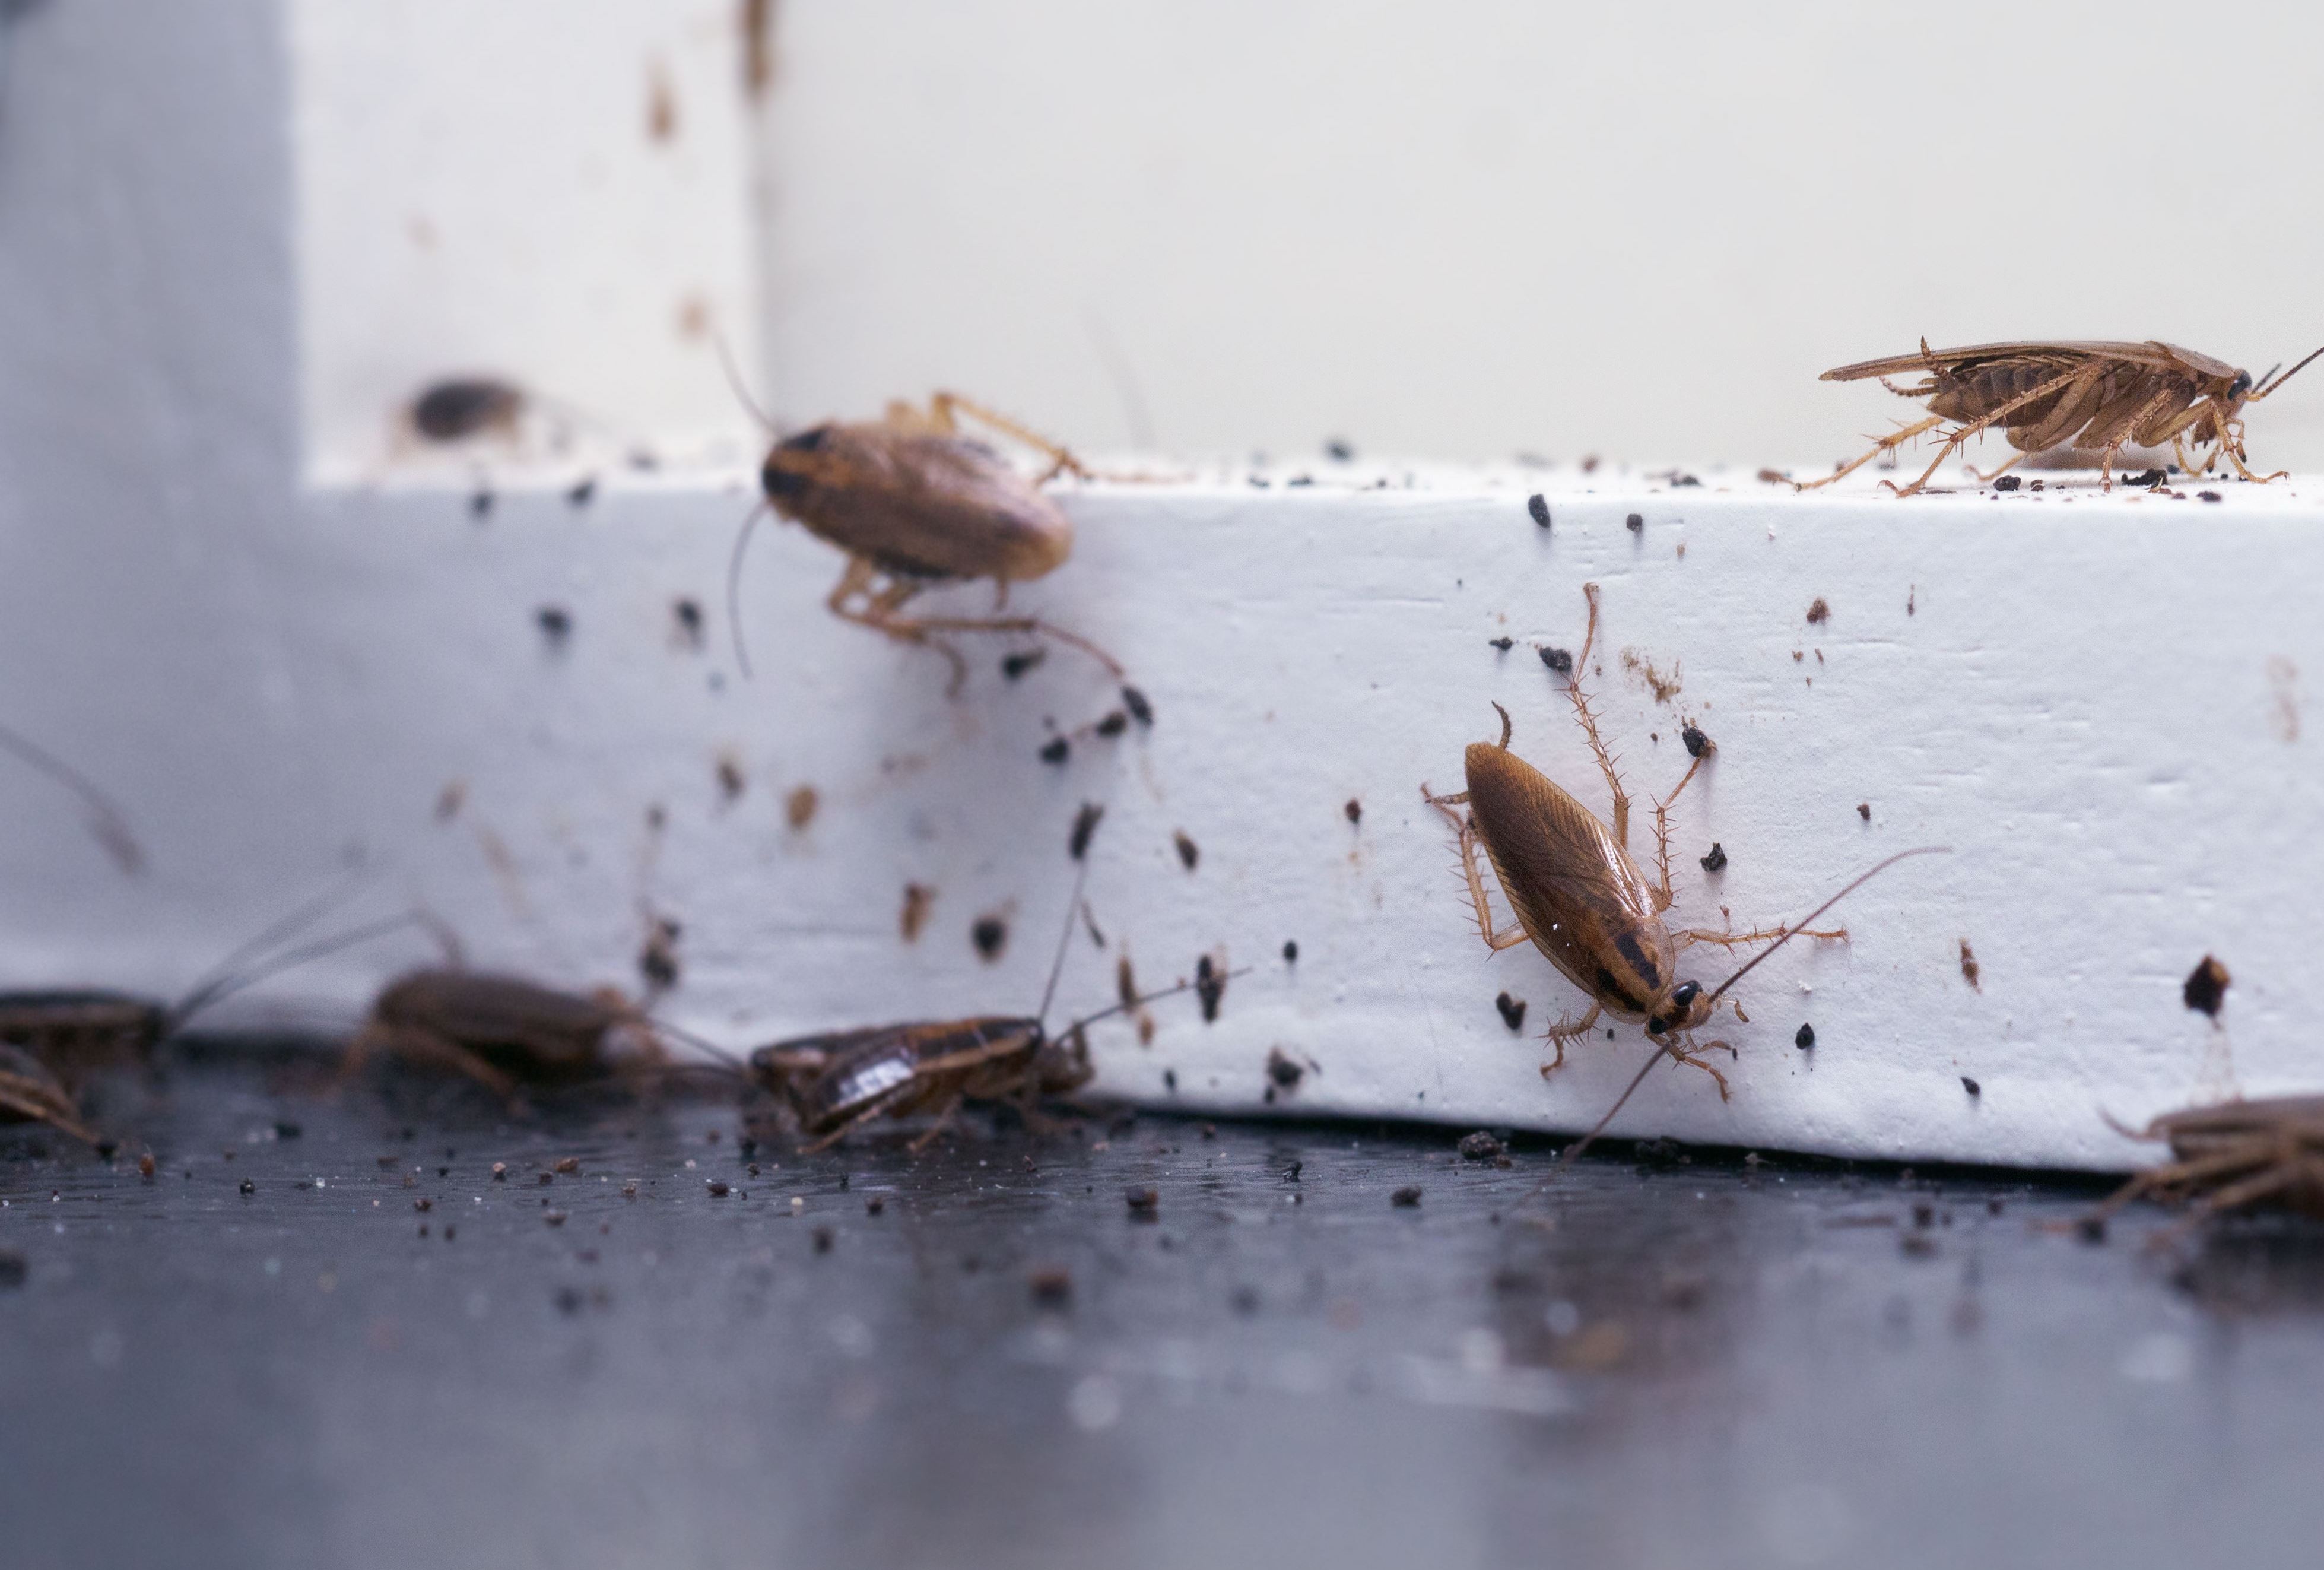 most disgusting workplace stories - american cockroach infestation